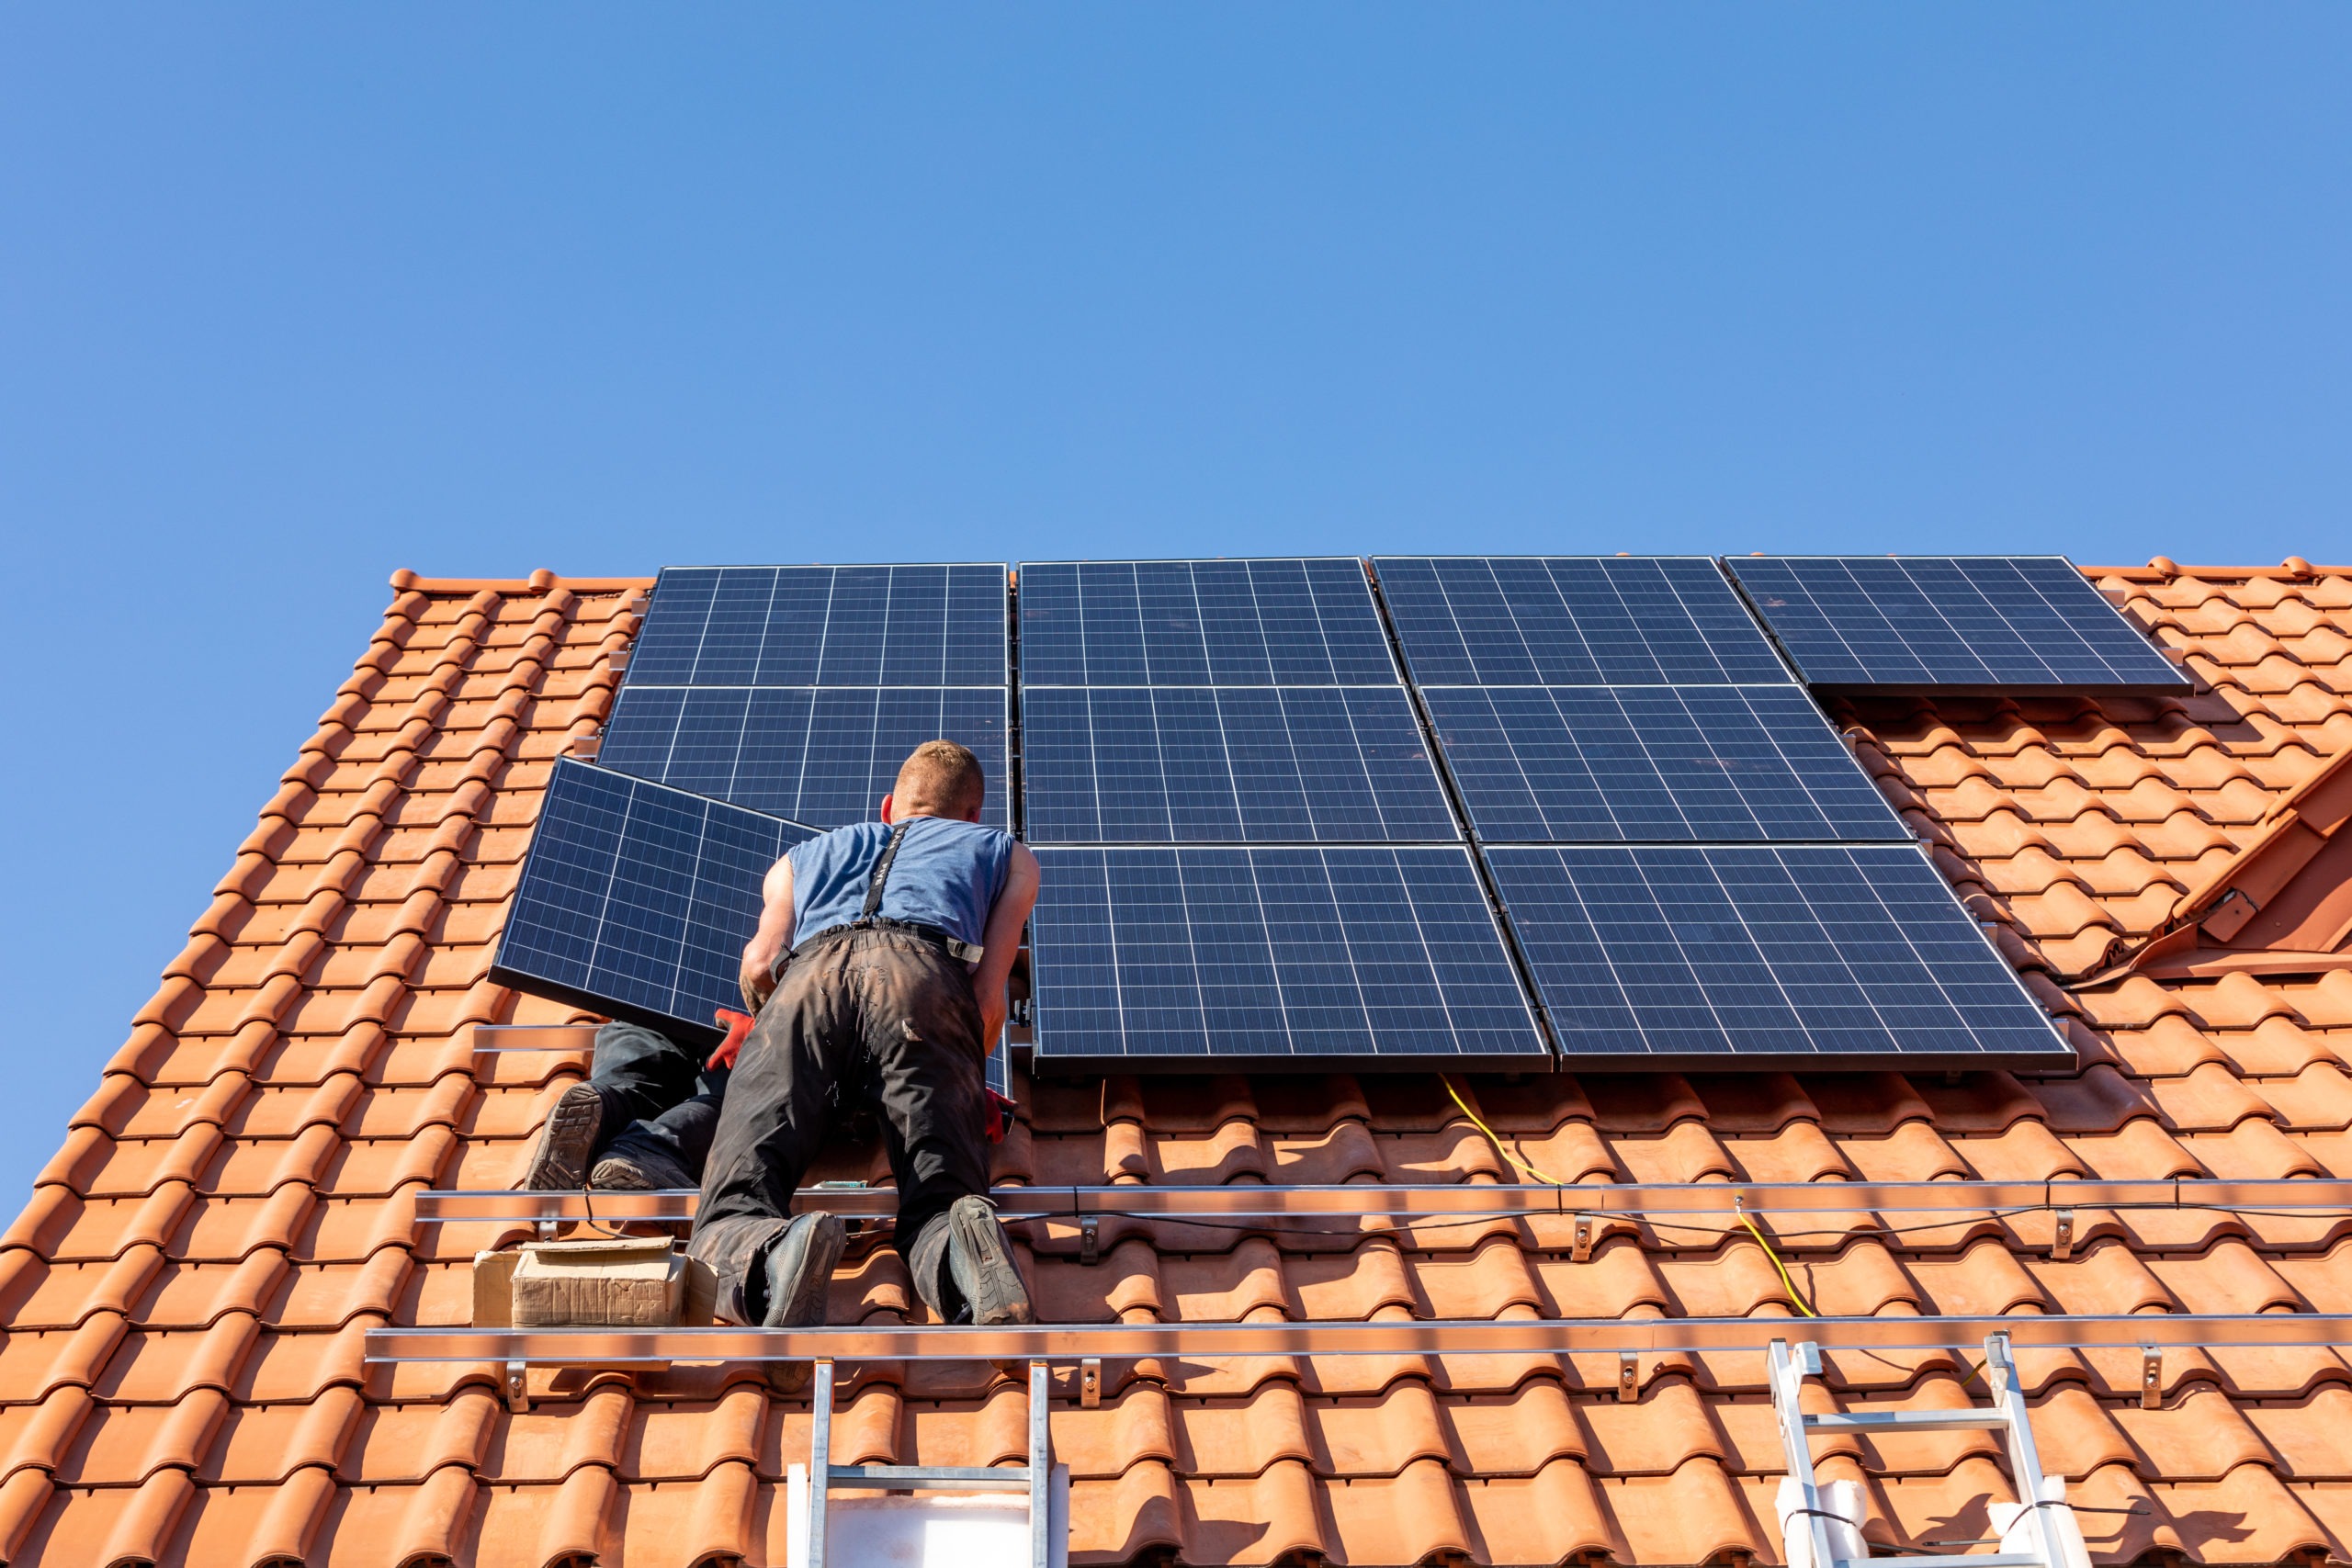 Workers installing solar electric panels on a house roof i